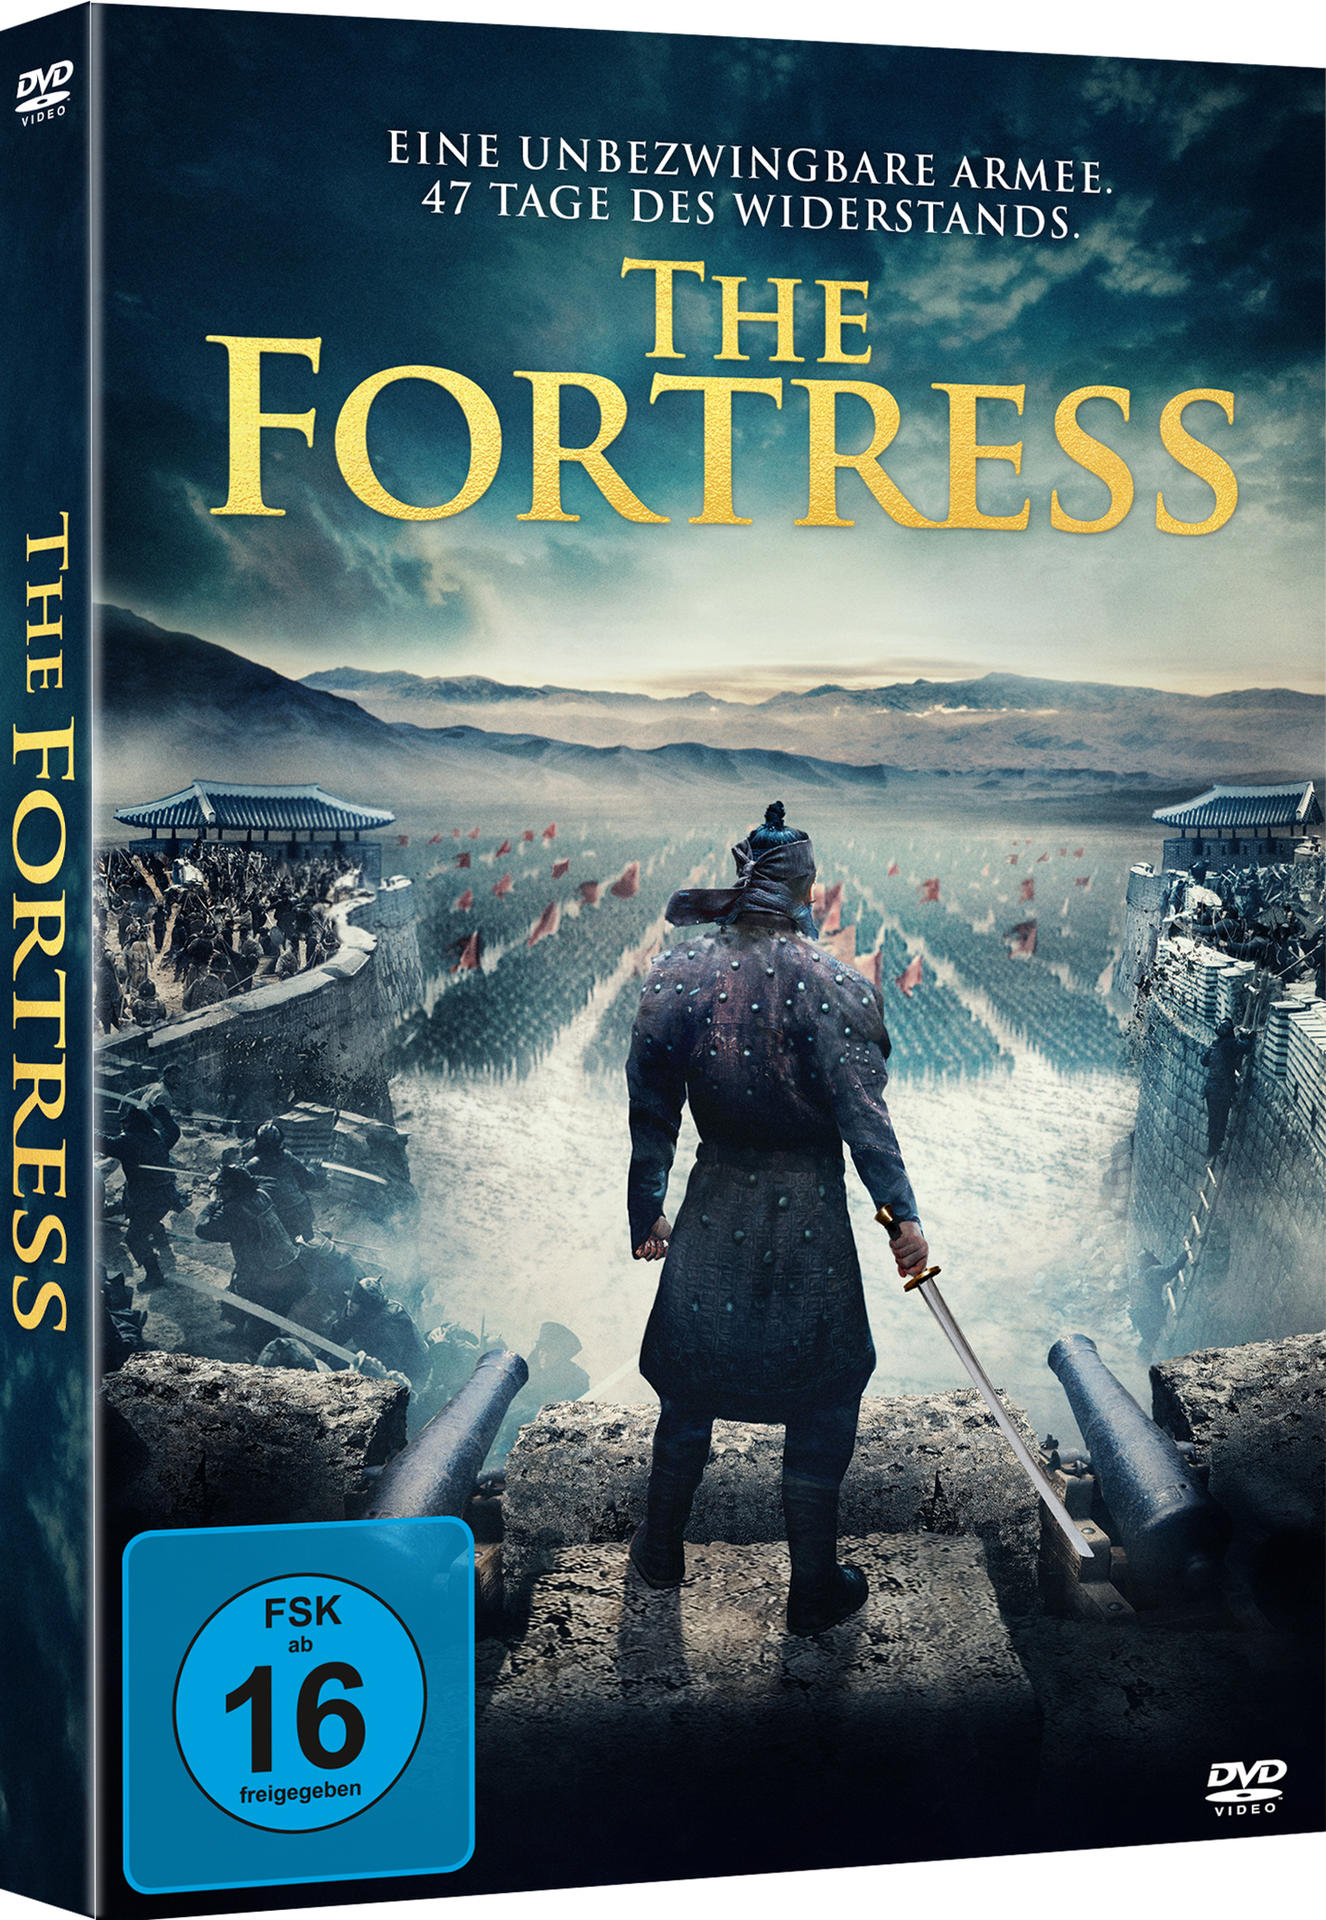 The Fortress DVD